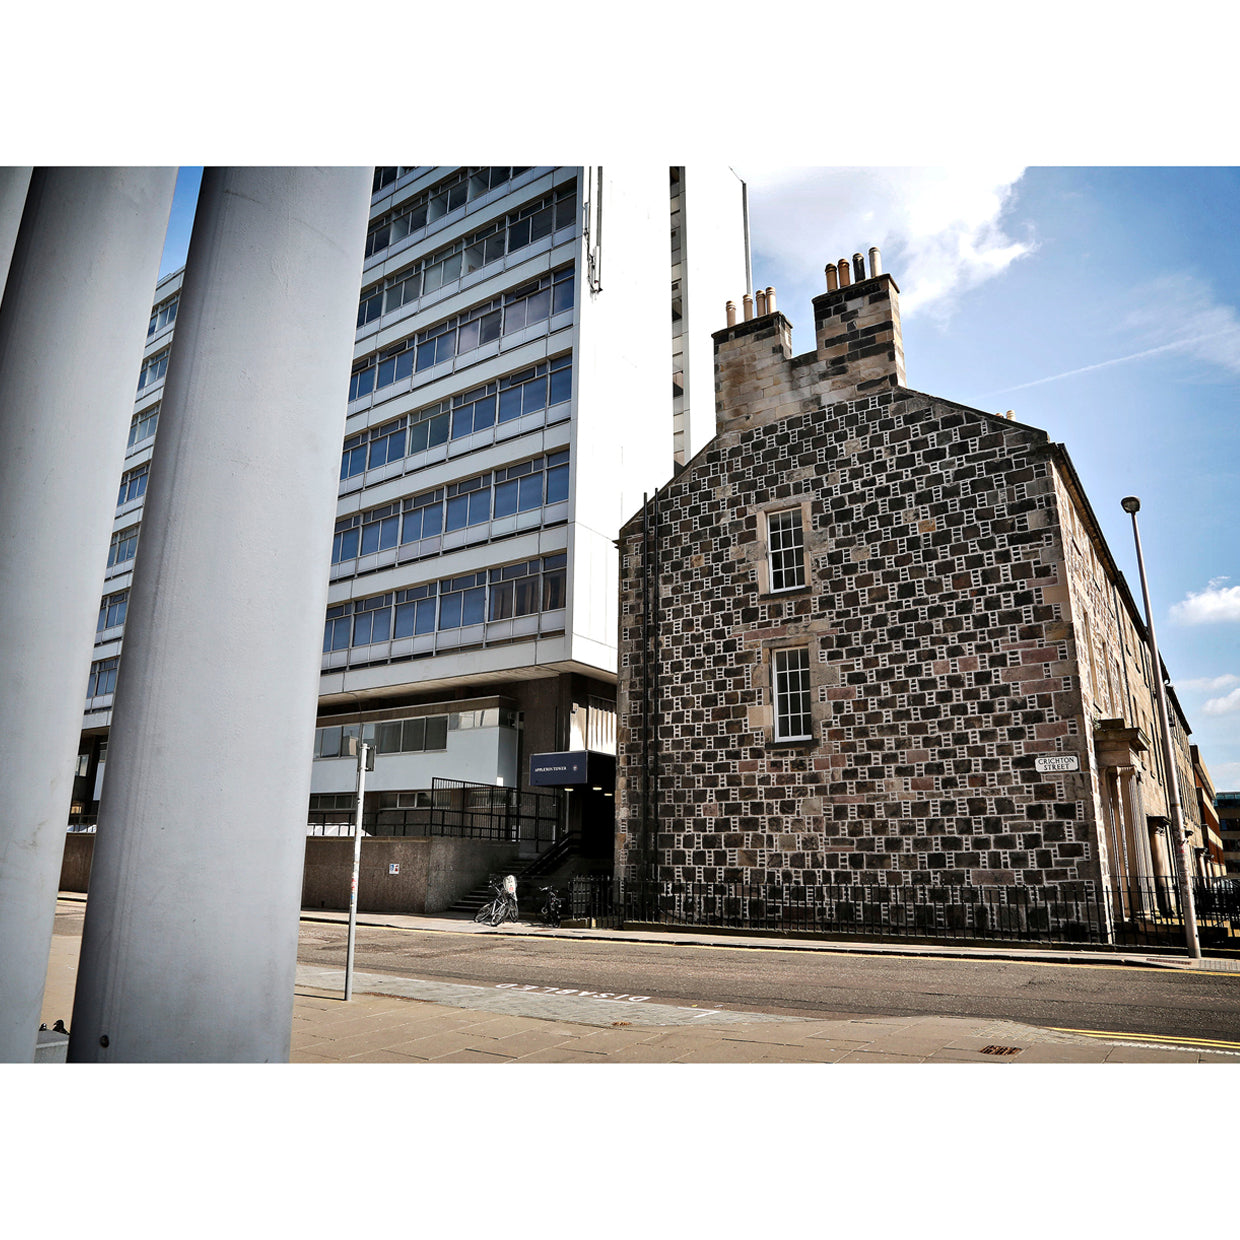 Photograph of Appleton Tower and 50 George Square